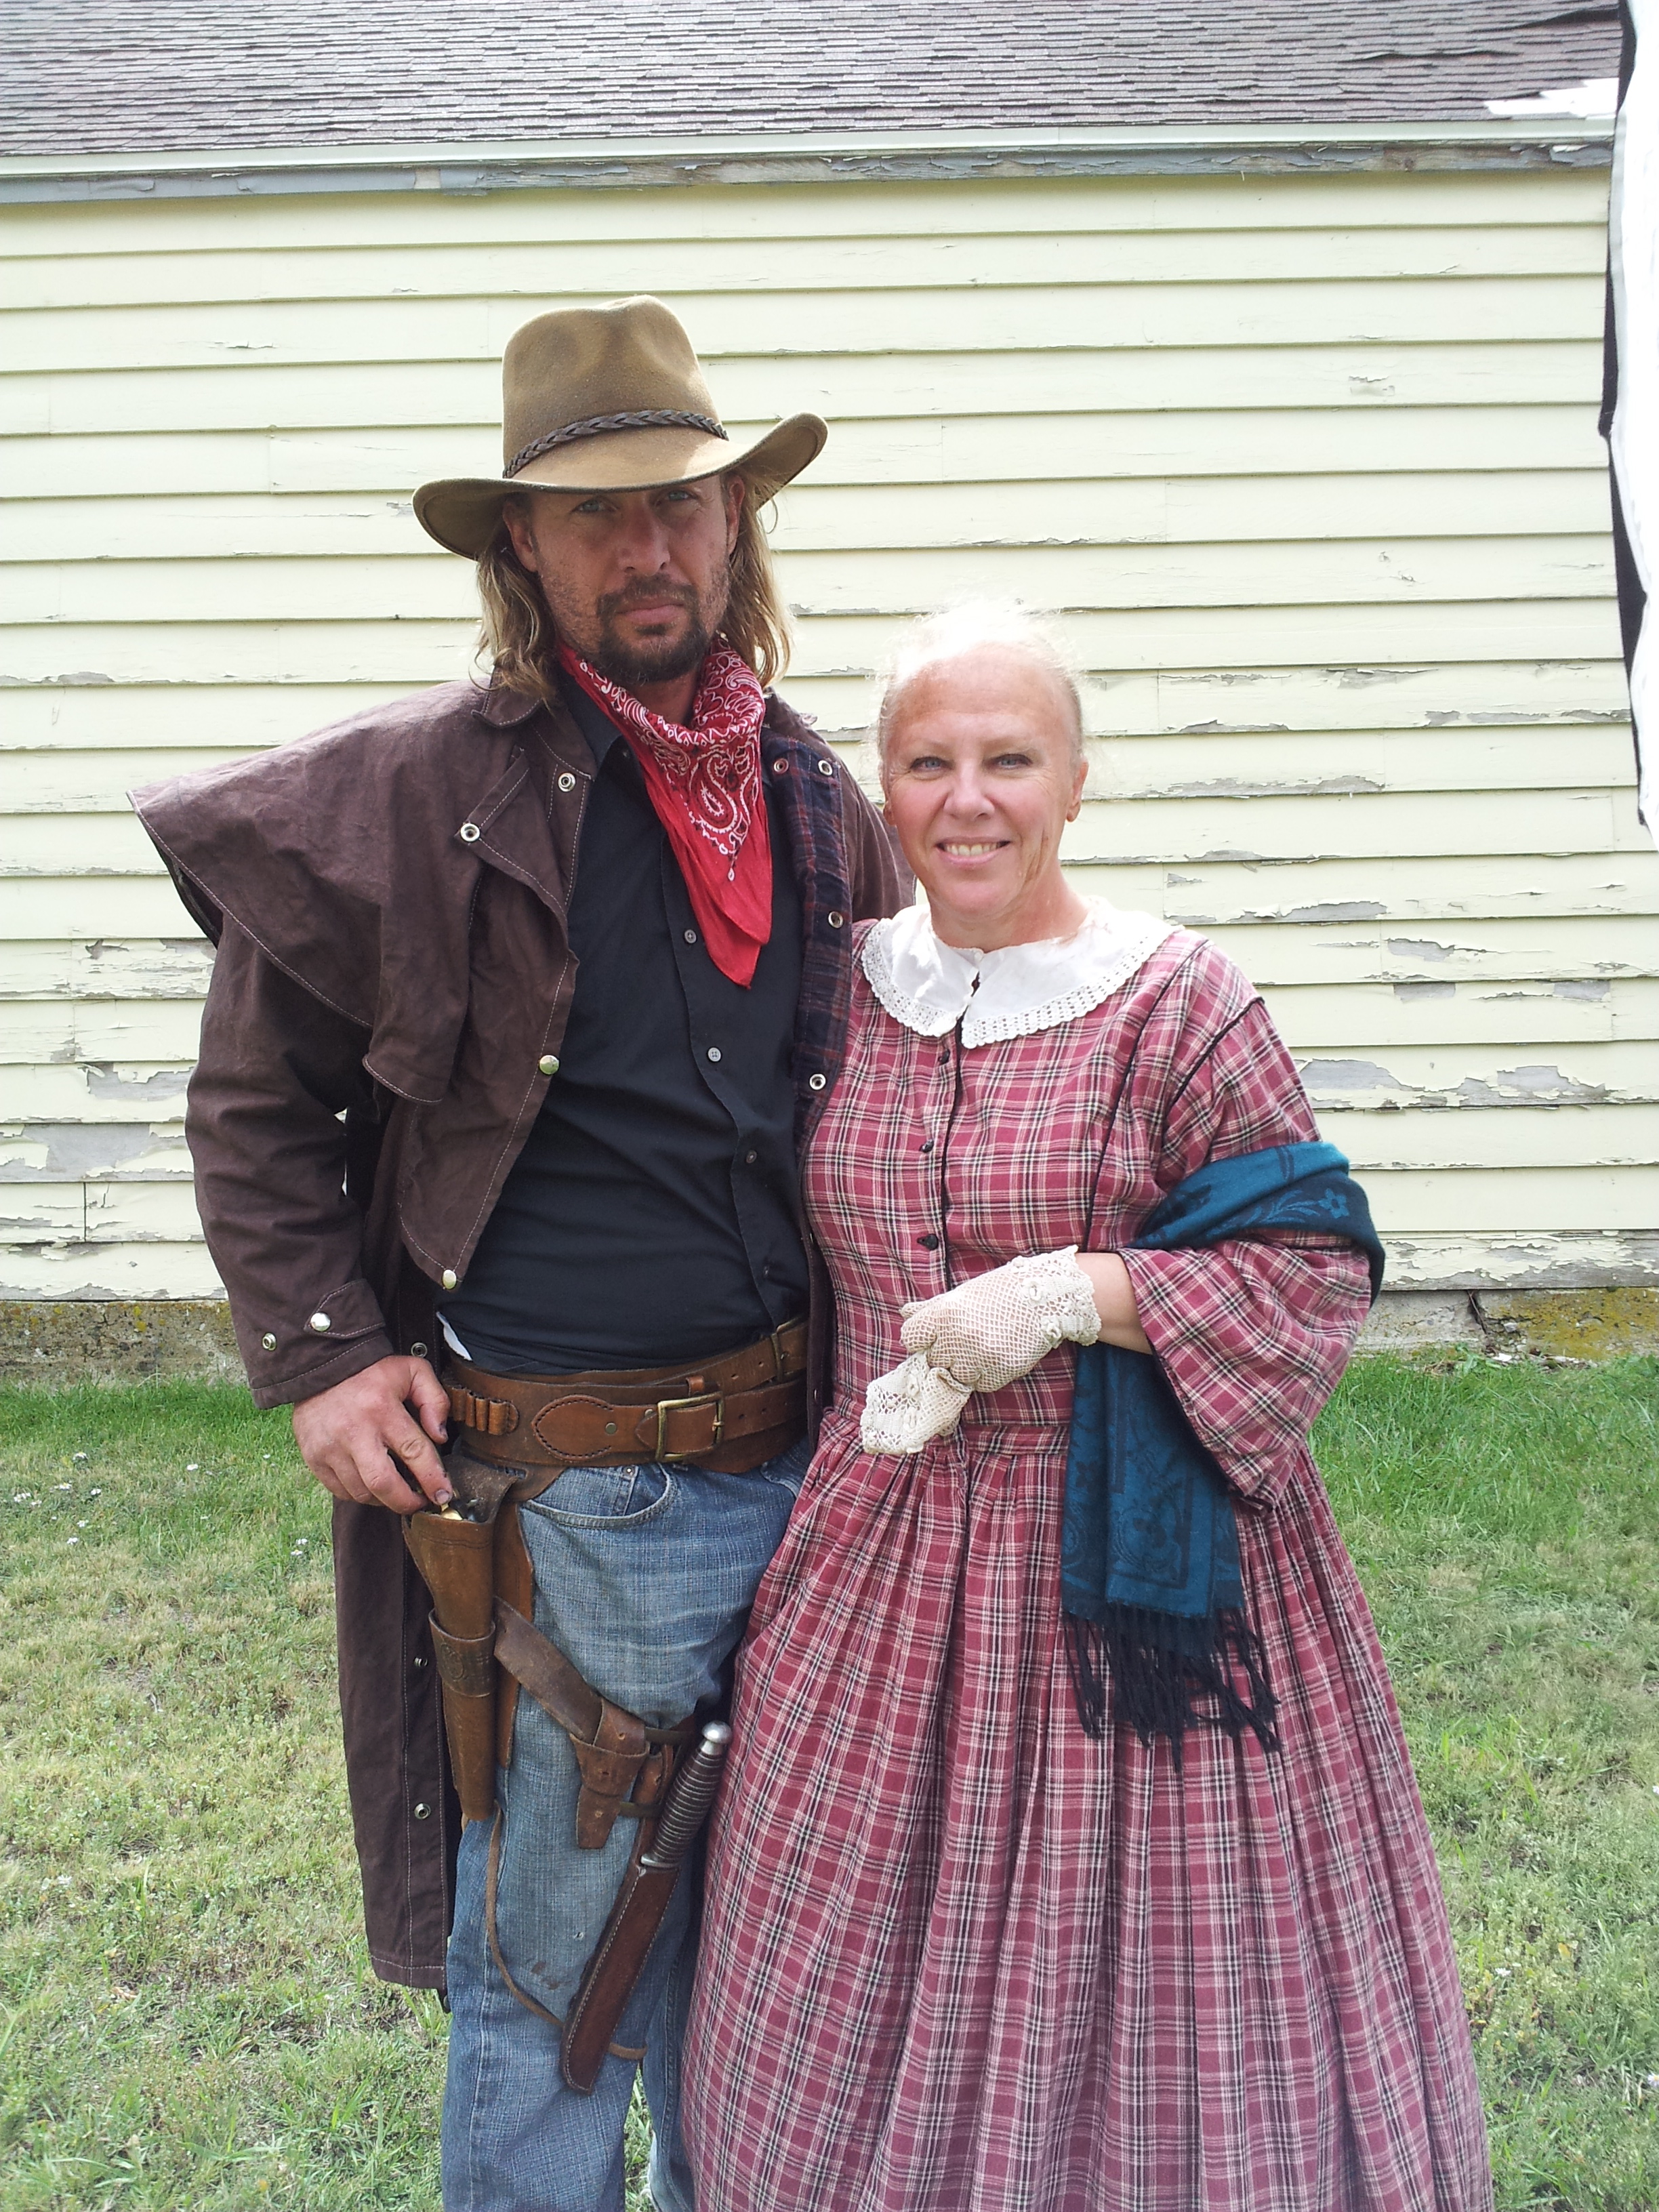 ON SET: 'Red Creek' Day 1 of production. Deborah Lee Douglas and My Pal/Star of 'Red Creek' Tom J. Post at Camp Floyd Stagecoach Inn State Park and Museum, UT. 9.2013